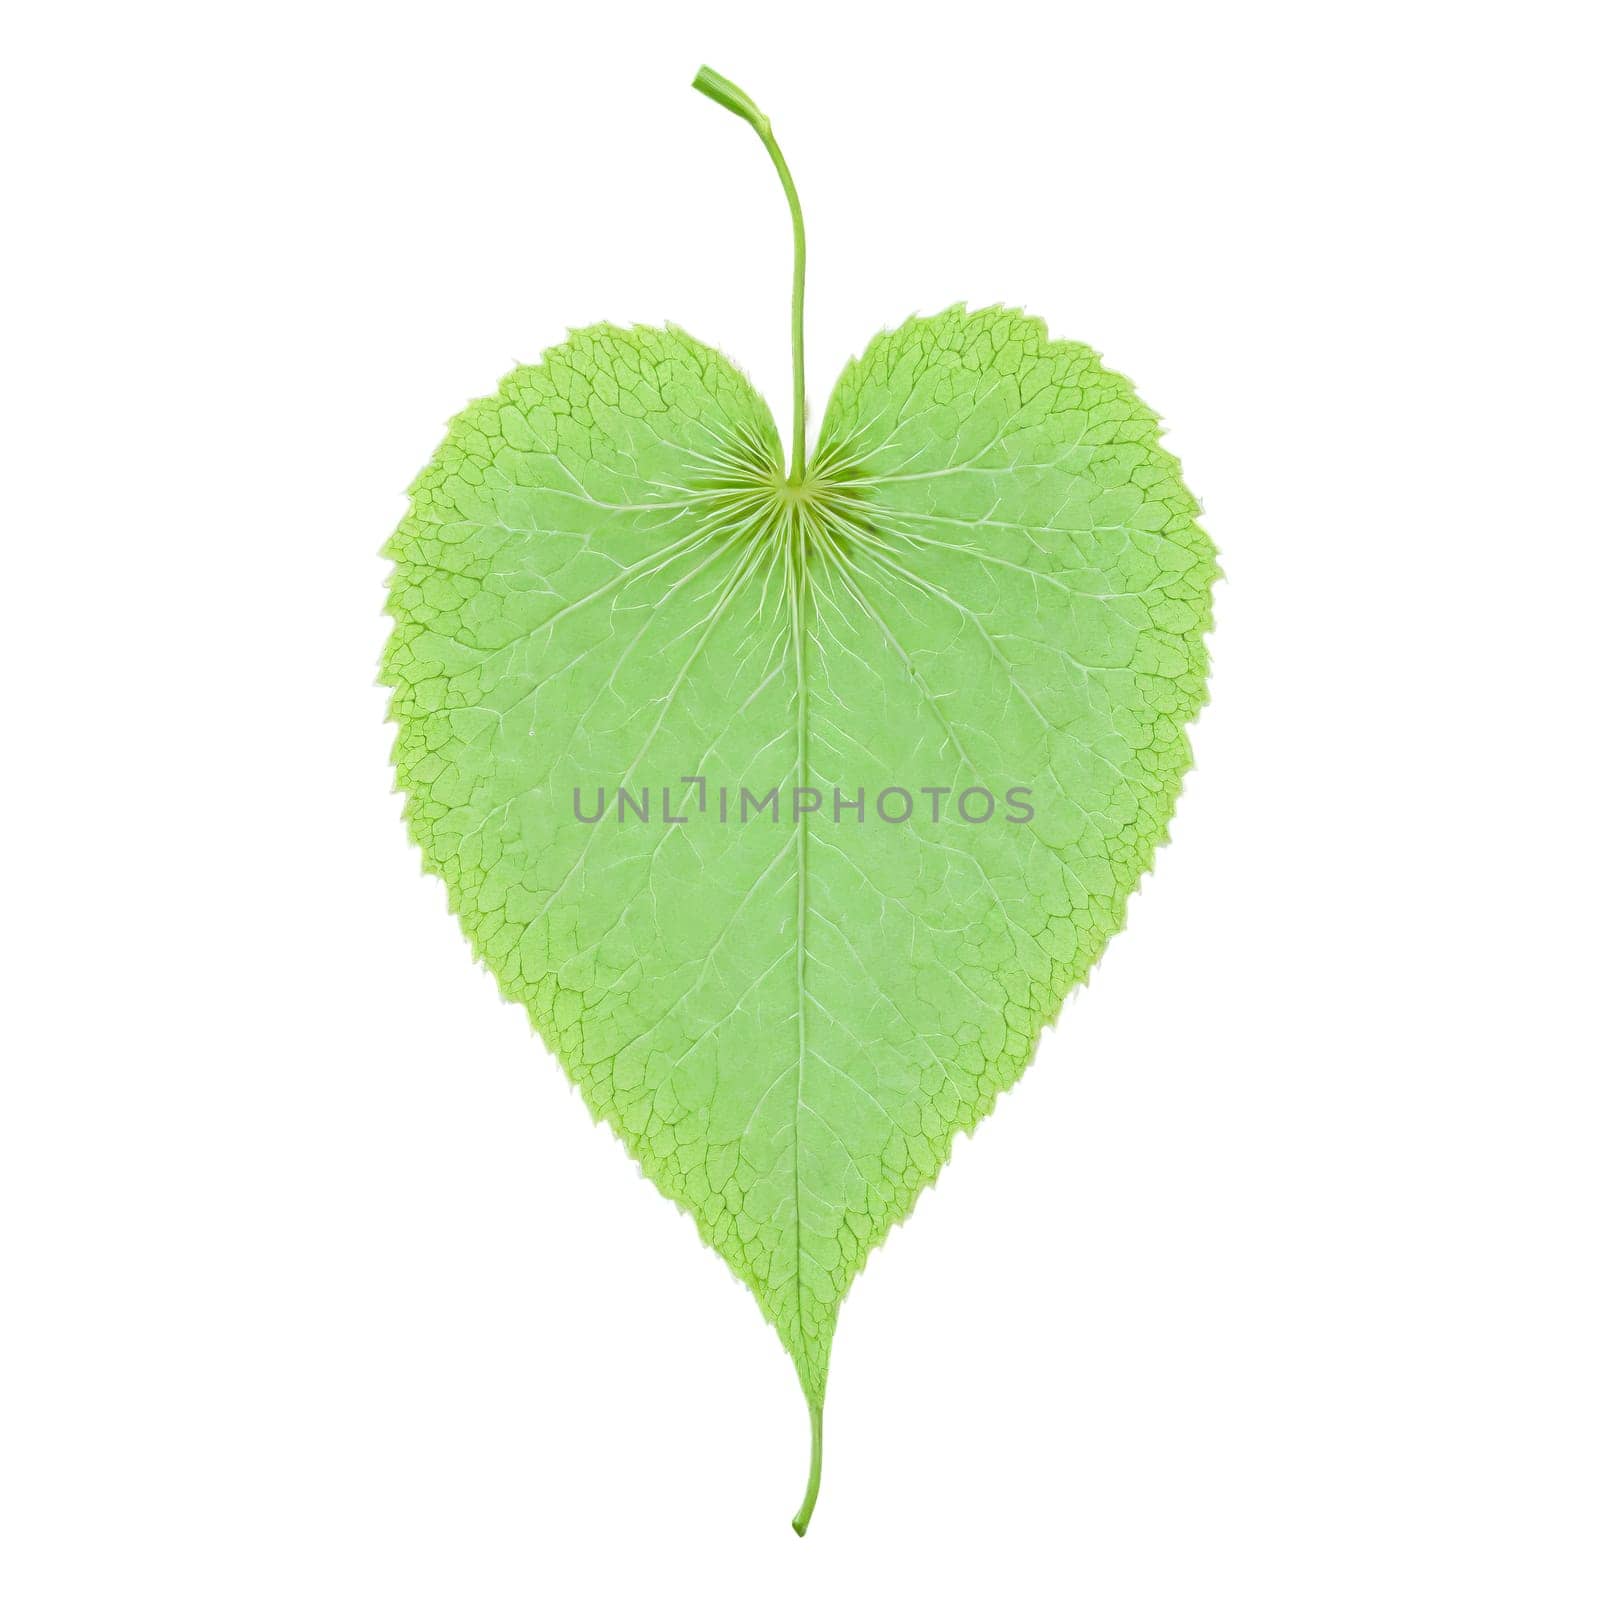 Linden Leaf heart shaped pale green leaf with serrated edges fluttering softly Tilia cordata Final by panophotograph